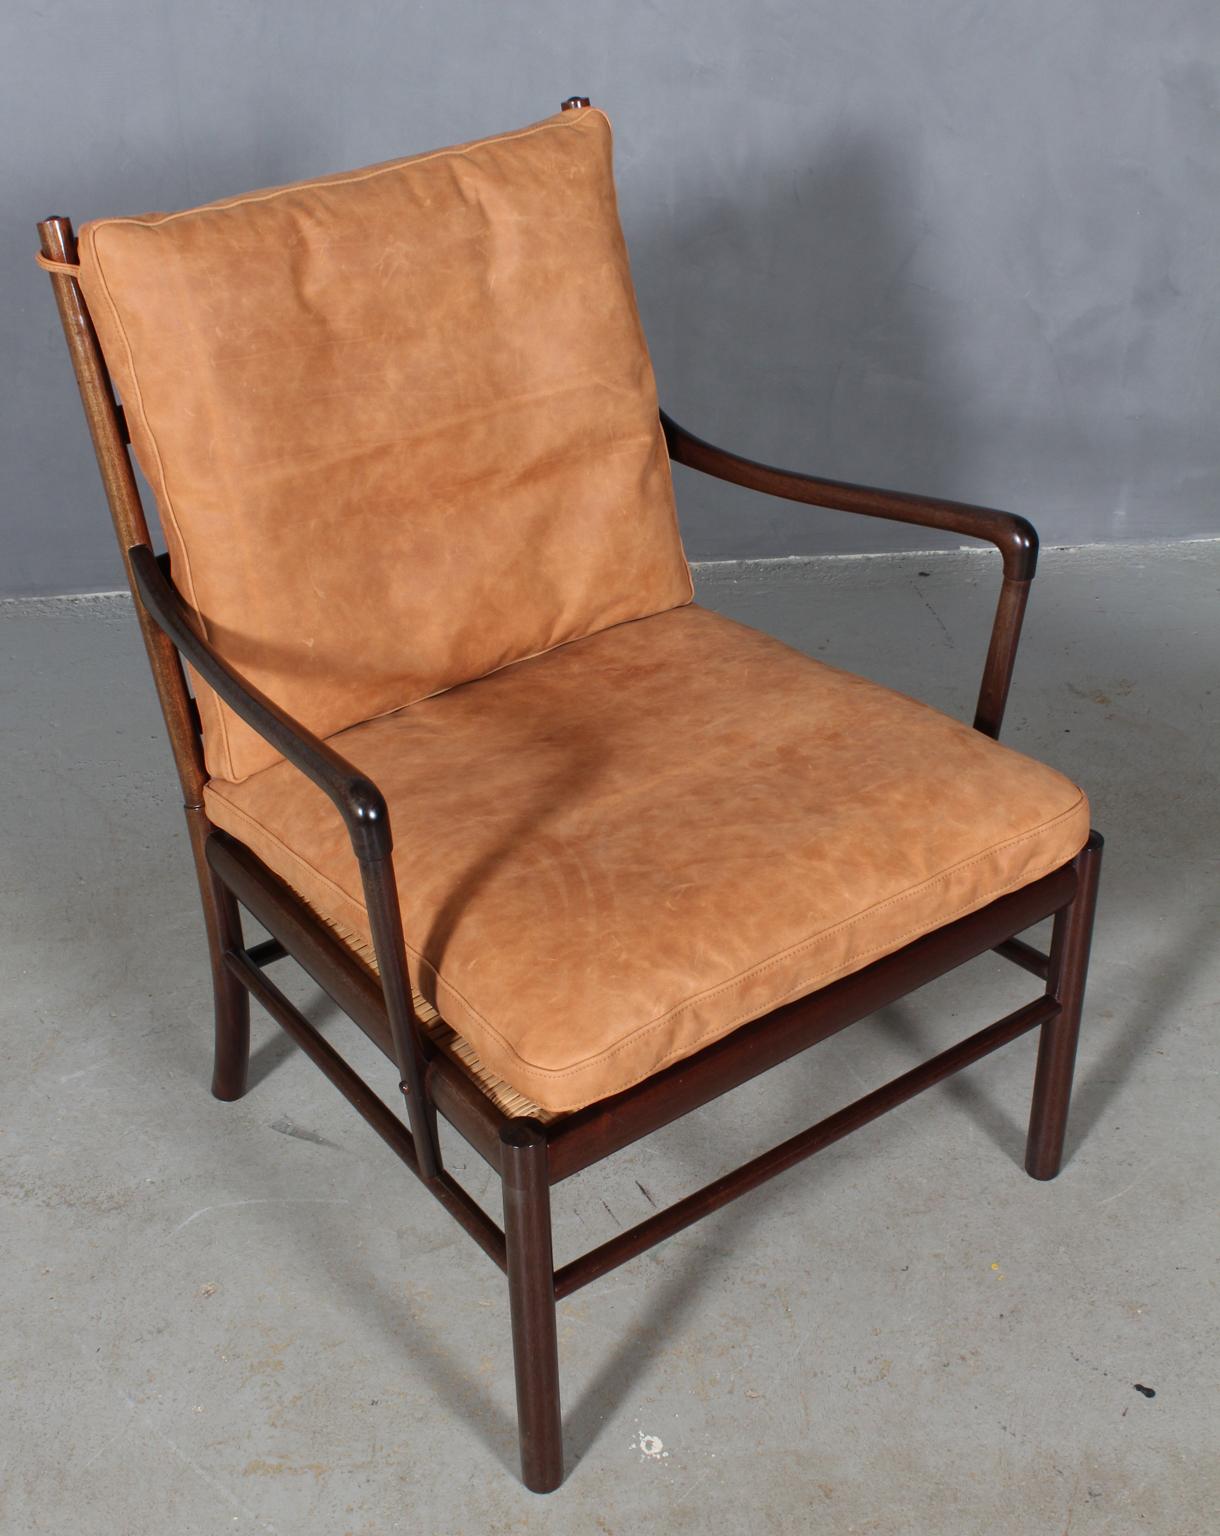 Ole Wanscher lounge chair new upholstered with cognac Dunes aniline leather from Arne Sørensen.

Made in mahogany. 

Model PJ 149 colonial chair, made by Poul Jeppesen.